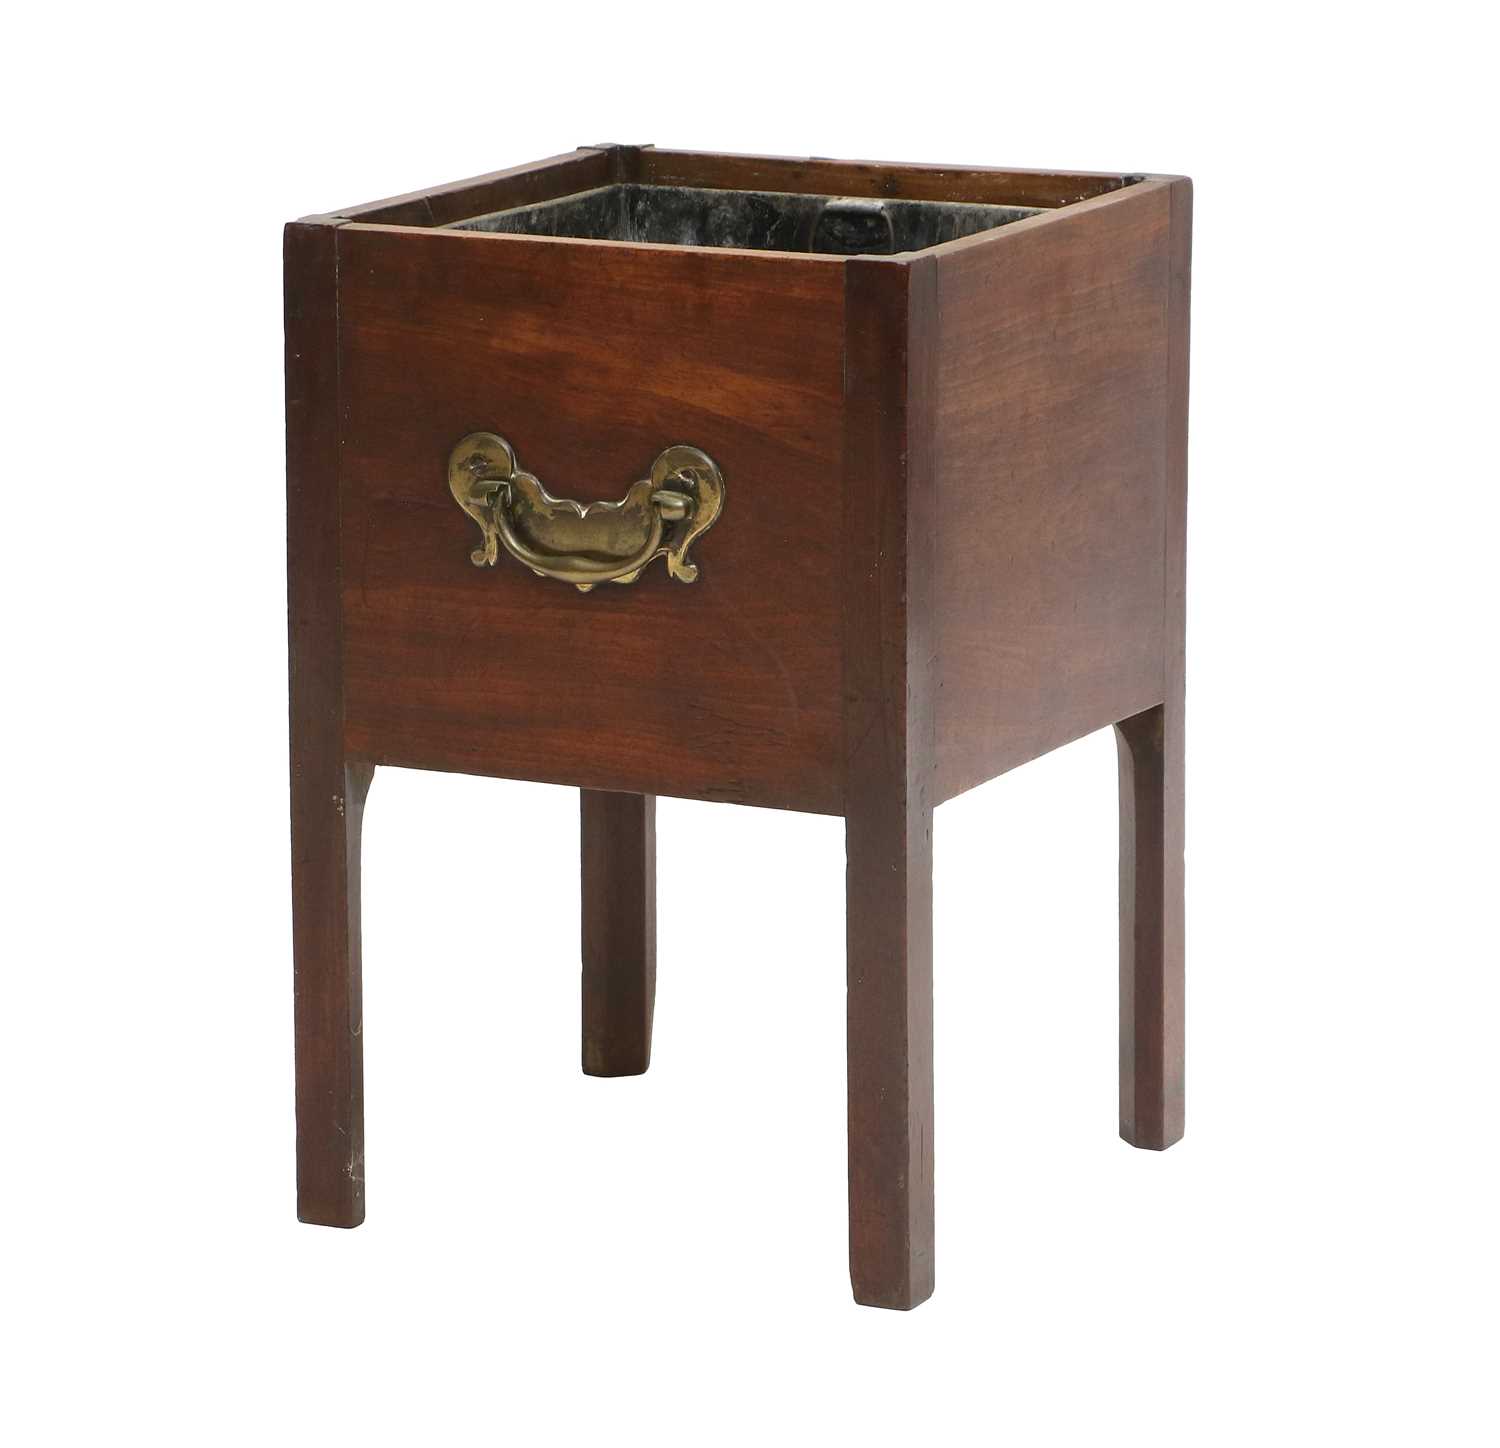 A George III Mahogany Planter, late 18th century, of octagonal-shaped form with brass carrying - Image 4 of 8